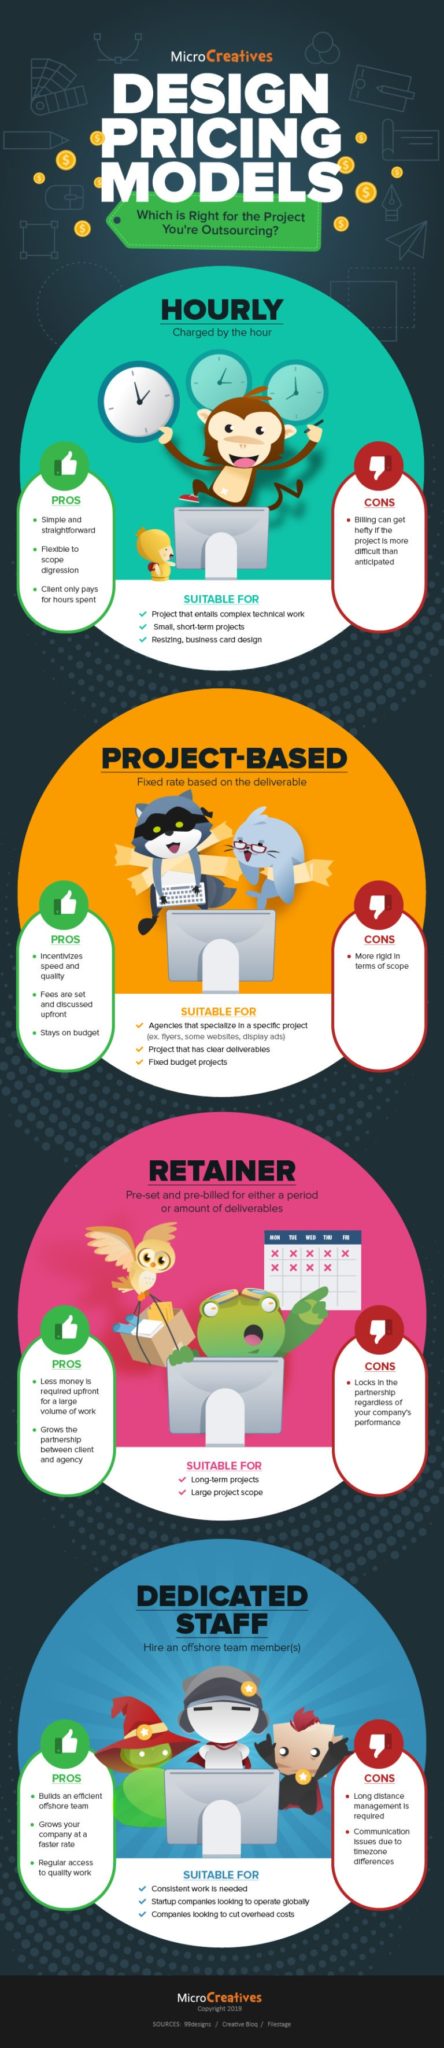 Infographic Outsourcing Design